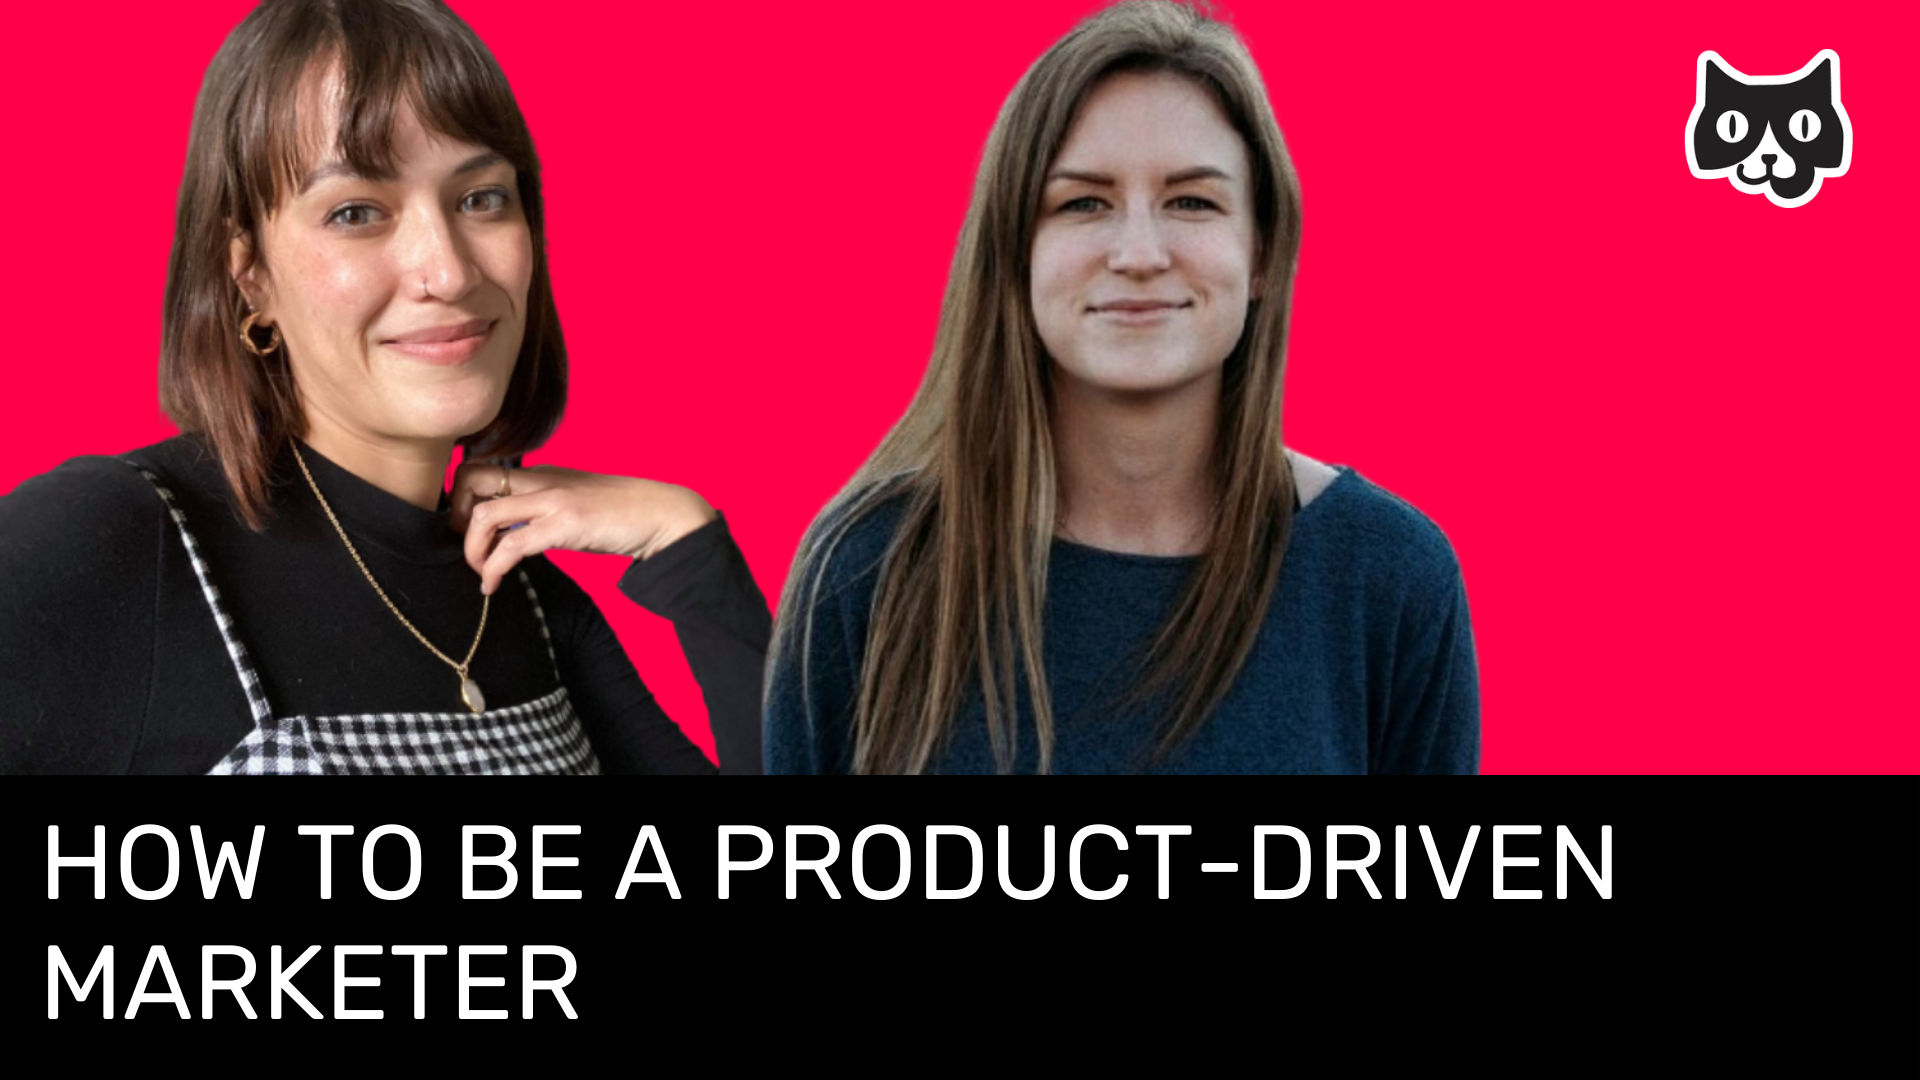 How to be a Product-Driven Marketer w/ Camille Trent